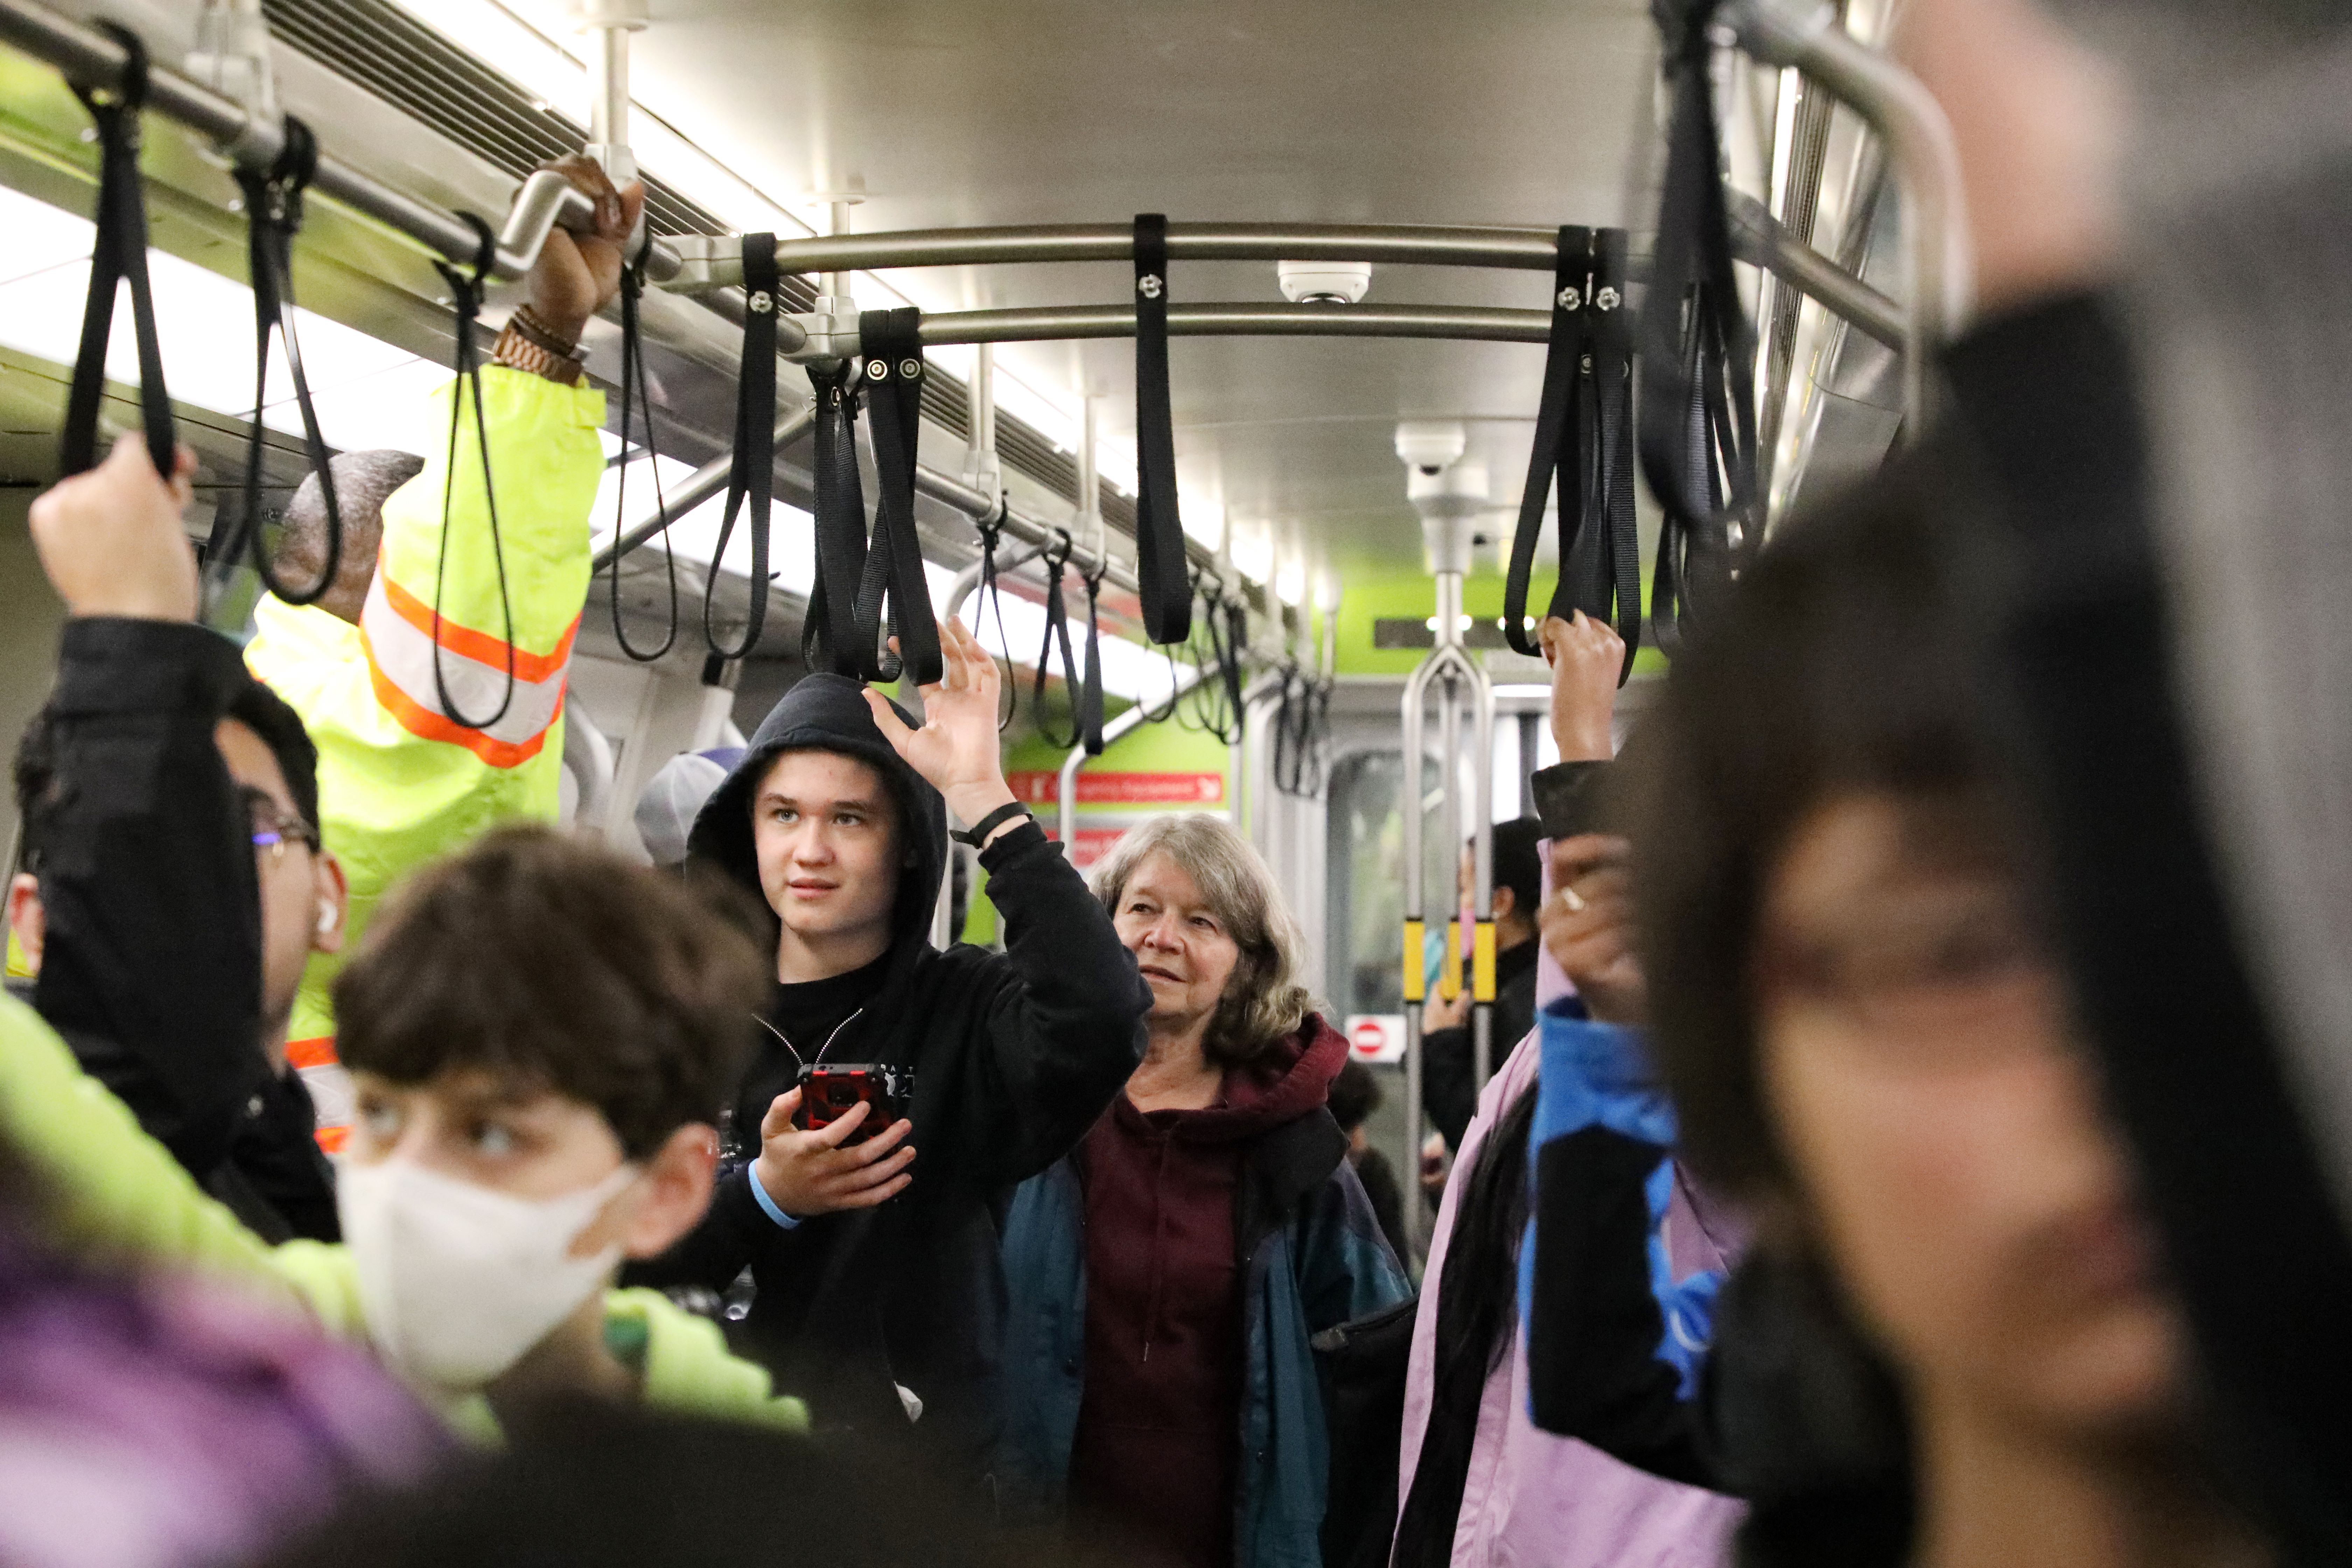 Local children ride BART between 19th St Oakland Station and Coliseum Station